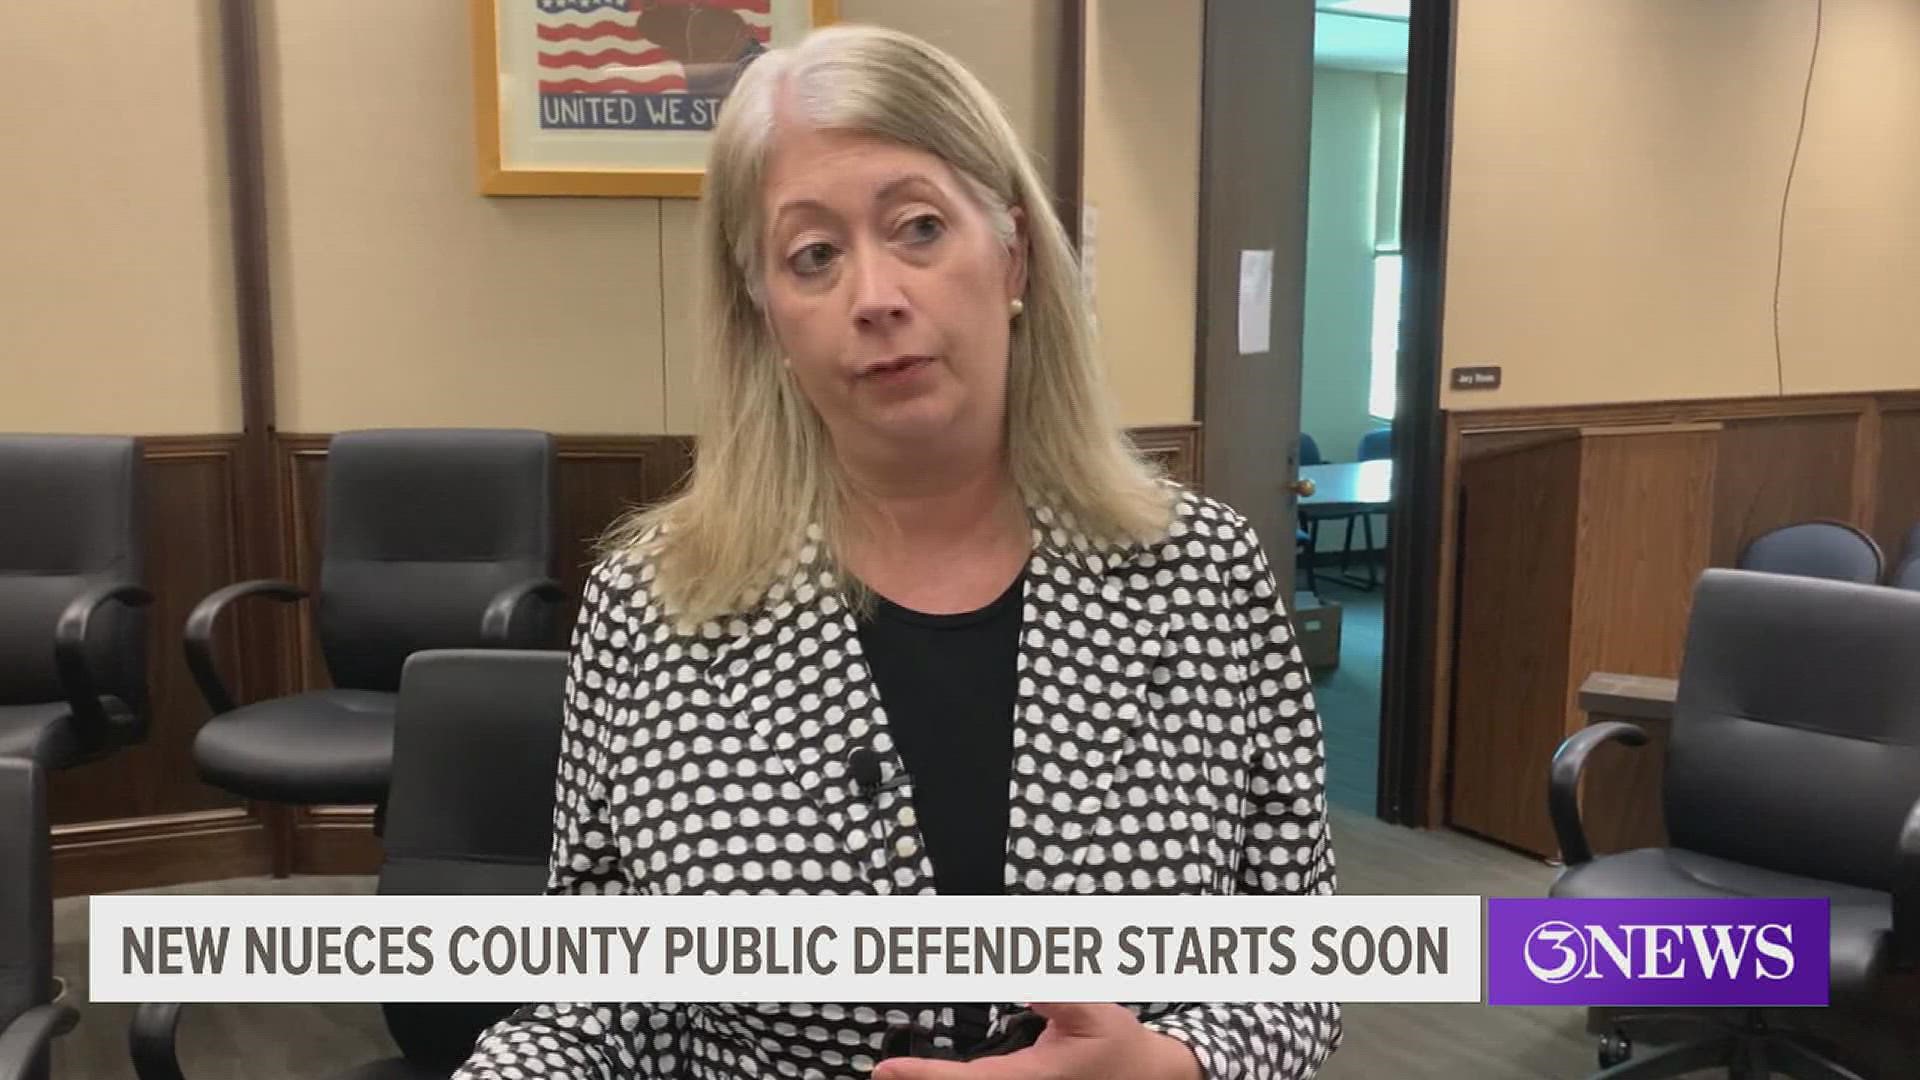 Nueces County's new Chief Public Defender Danice Obregon plans on providing higher quality help to those who struggle with mental illness and legal costs.